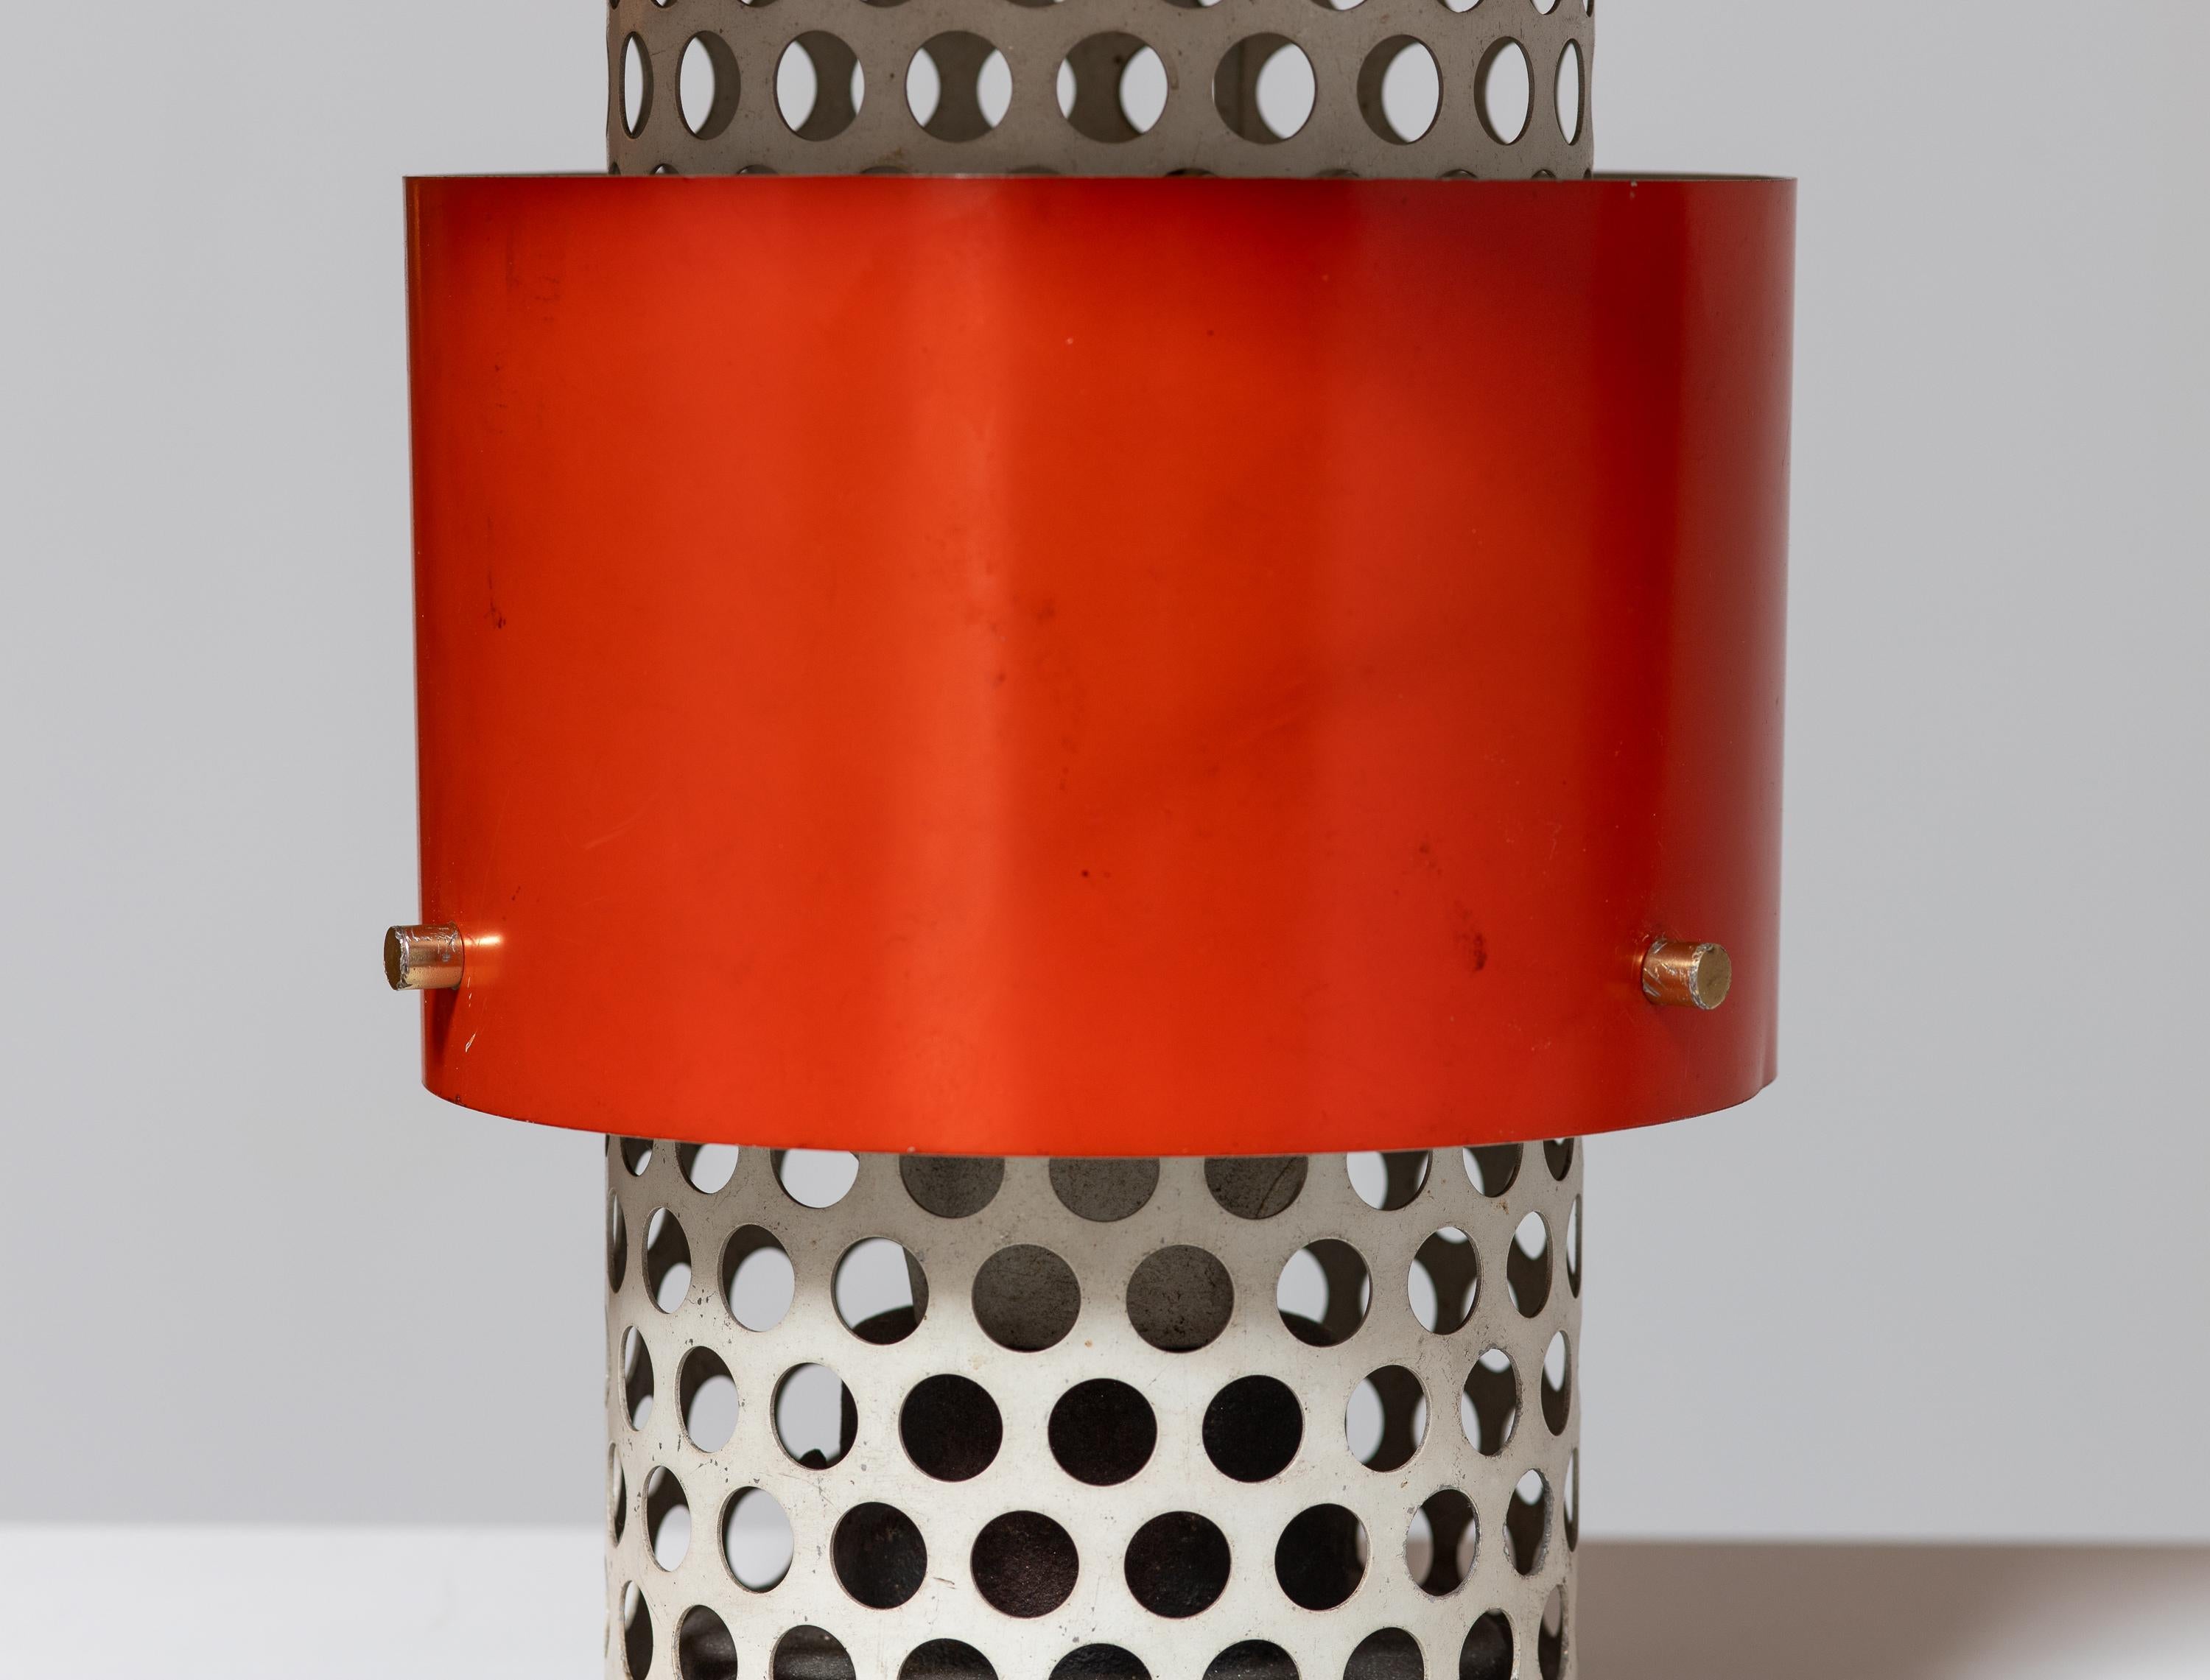 Lightolier Lytescape Perforated Metal Outdoor Lanterns or Lamps In Good Condition For Sale In Brooklyn, NY